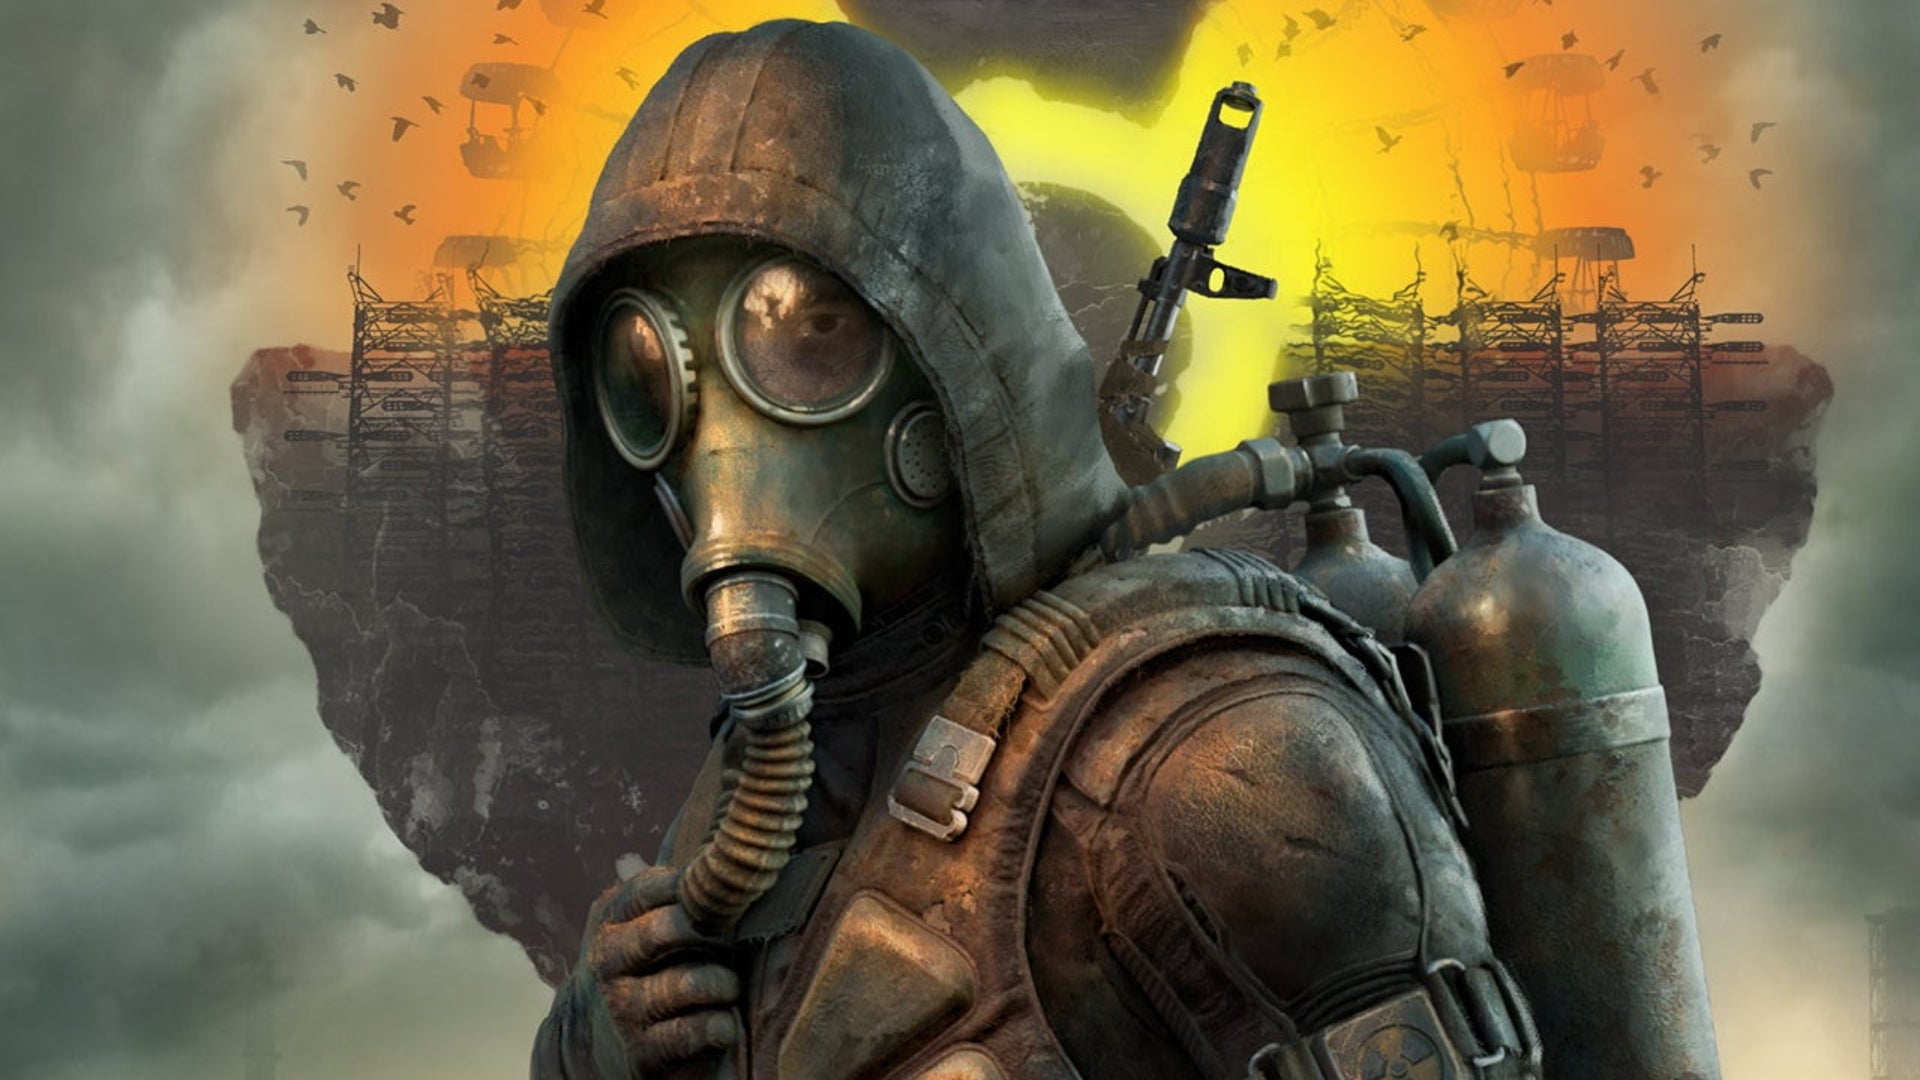 S.T.A.L.K.E.R. 2 dev asks fans to donate to Ukraine military as Russia invades